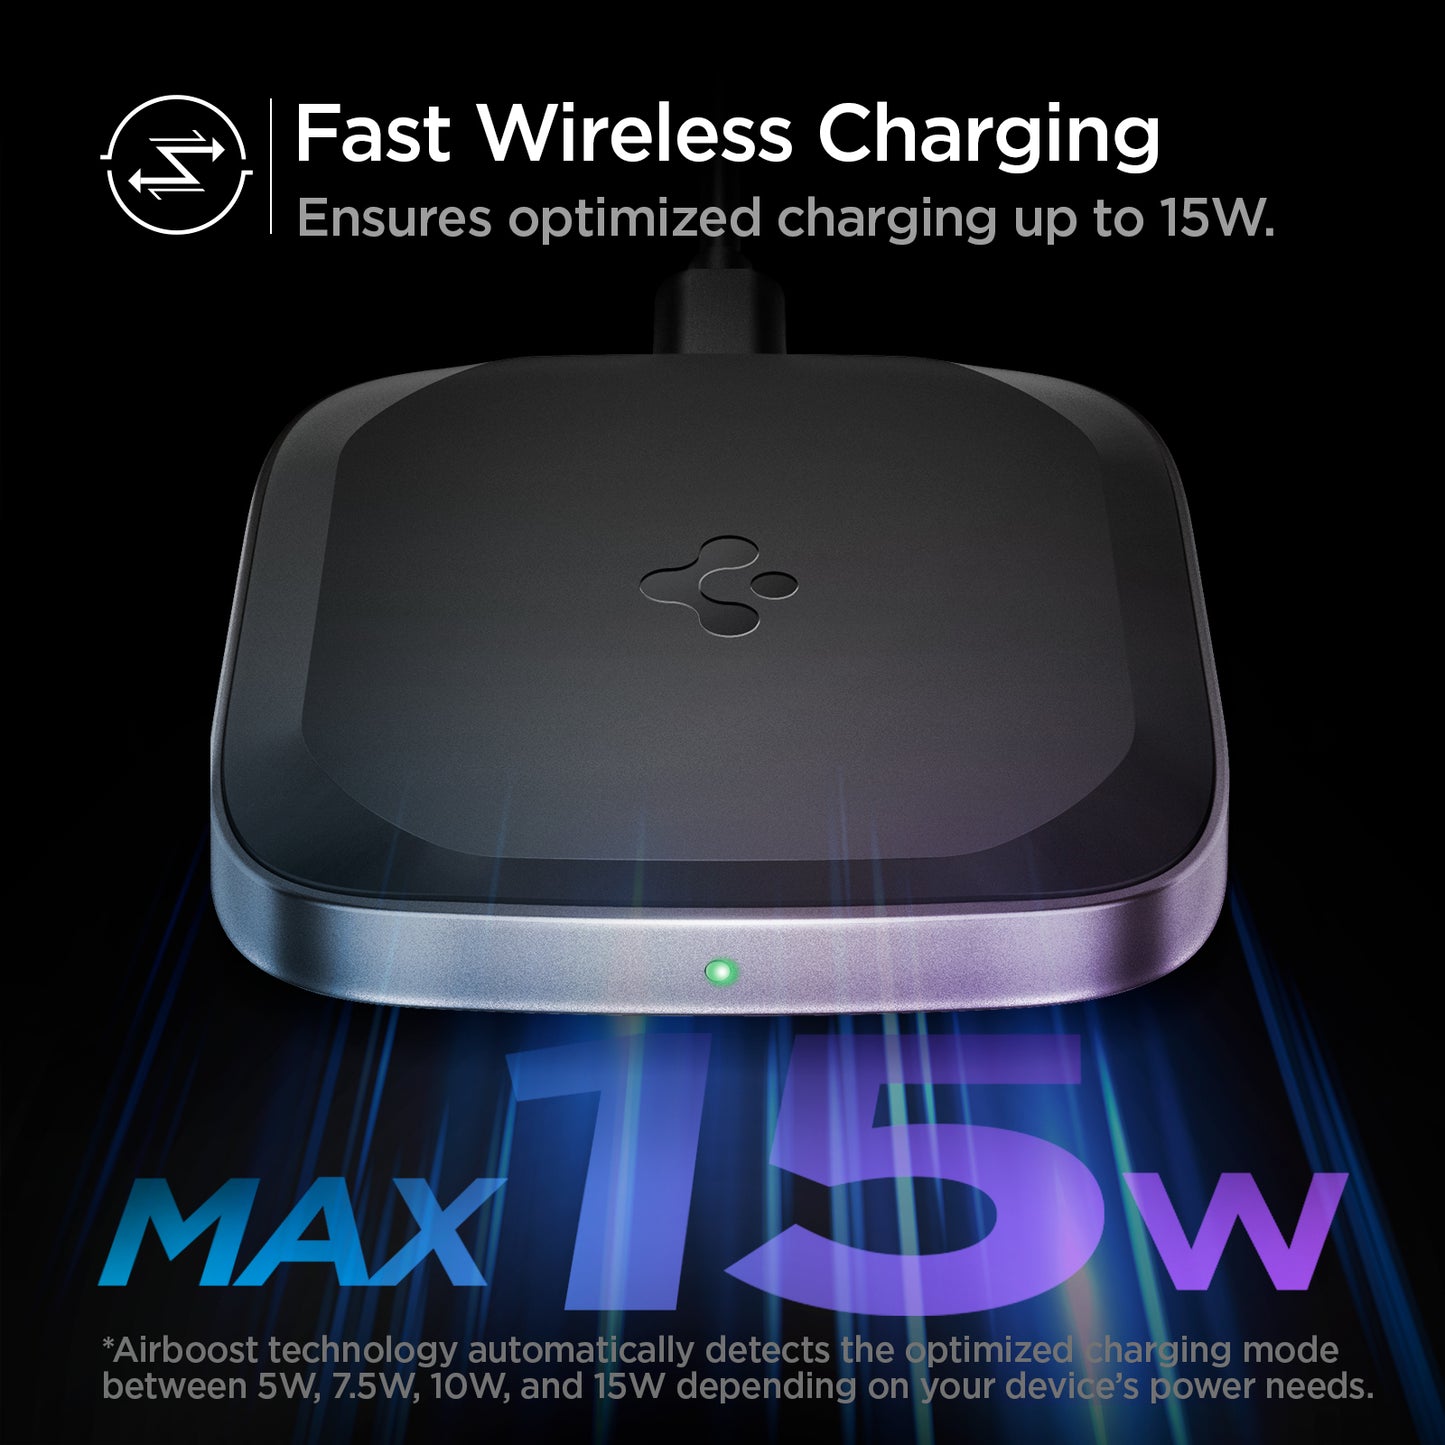 ACH02578 - ArcField™ 15W Wireless Charger PF2004 in Black showing the Fast Wireless Charging, ensures optimized charging up to 15W with max 15W. Airboost technology automatically detects the optimized charging mode between 5W, 7.5W. 10W, and 15W depending on the device's needed power